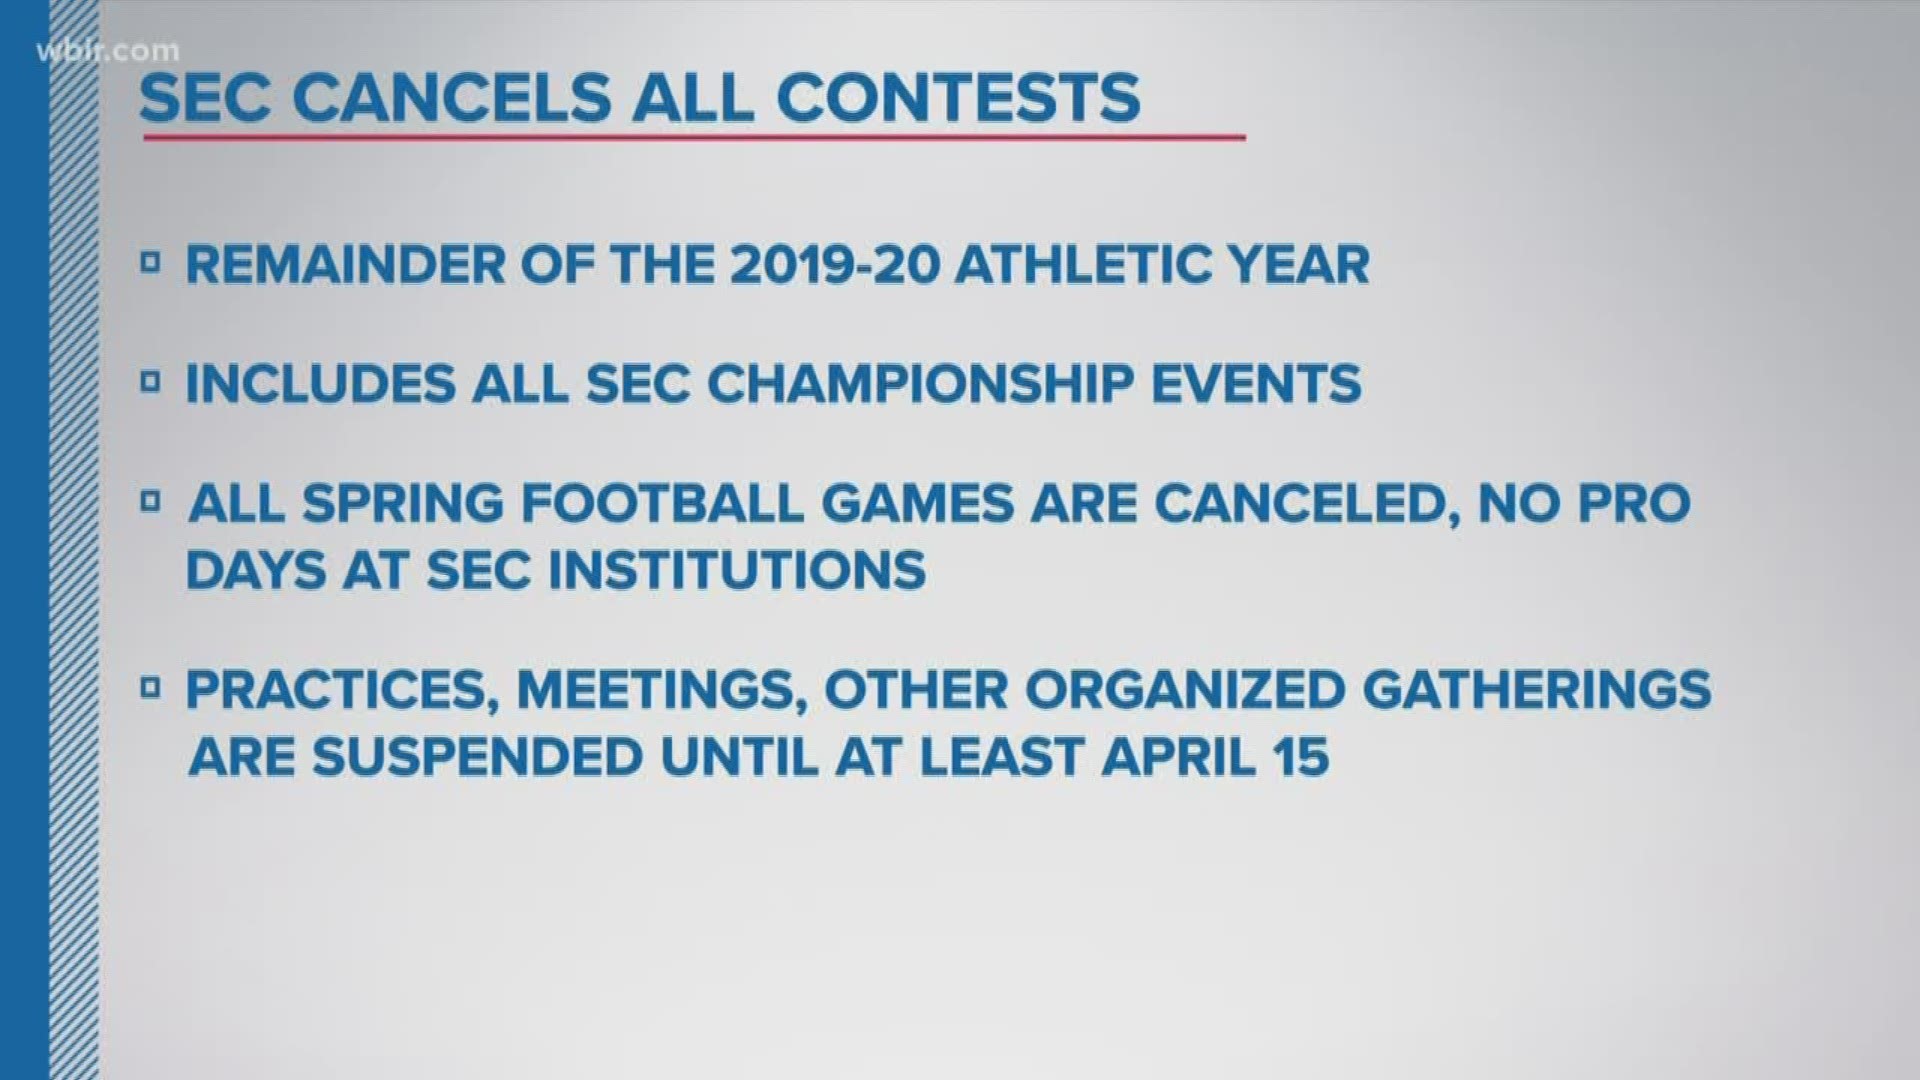 The remainder of the 2019-20 athletic year does not mean the fall sports are canceled. Think of it as the spring and summer semester.